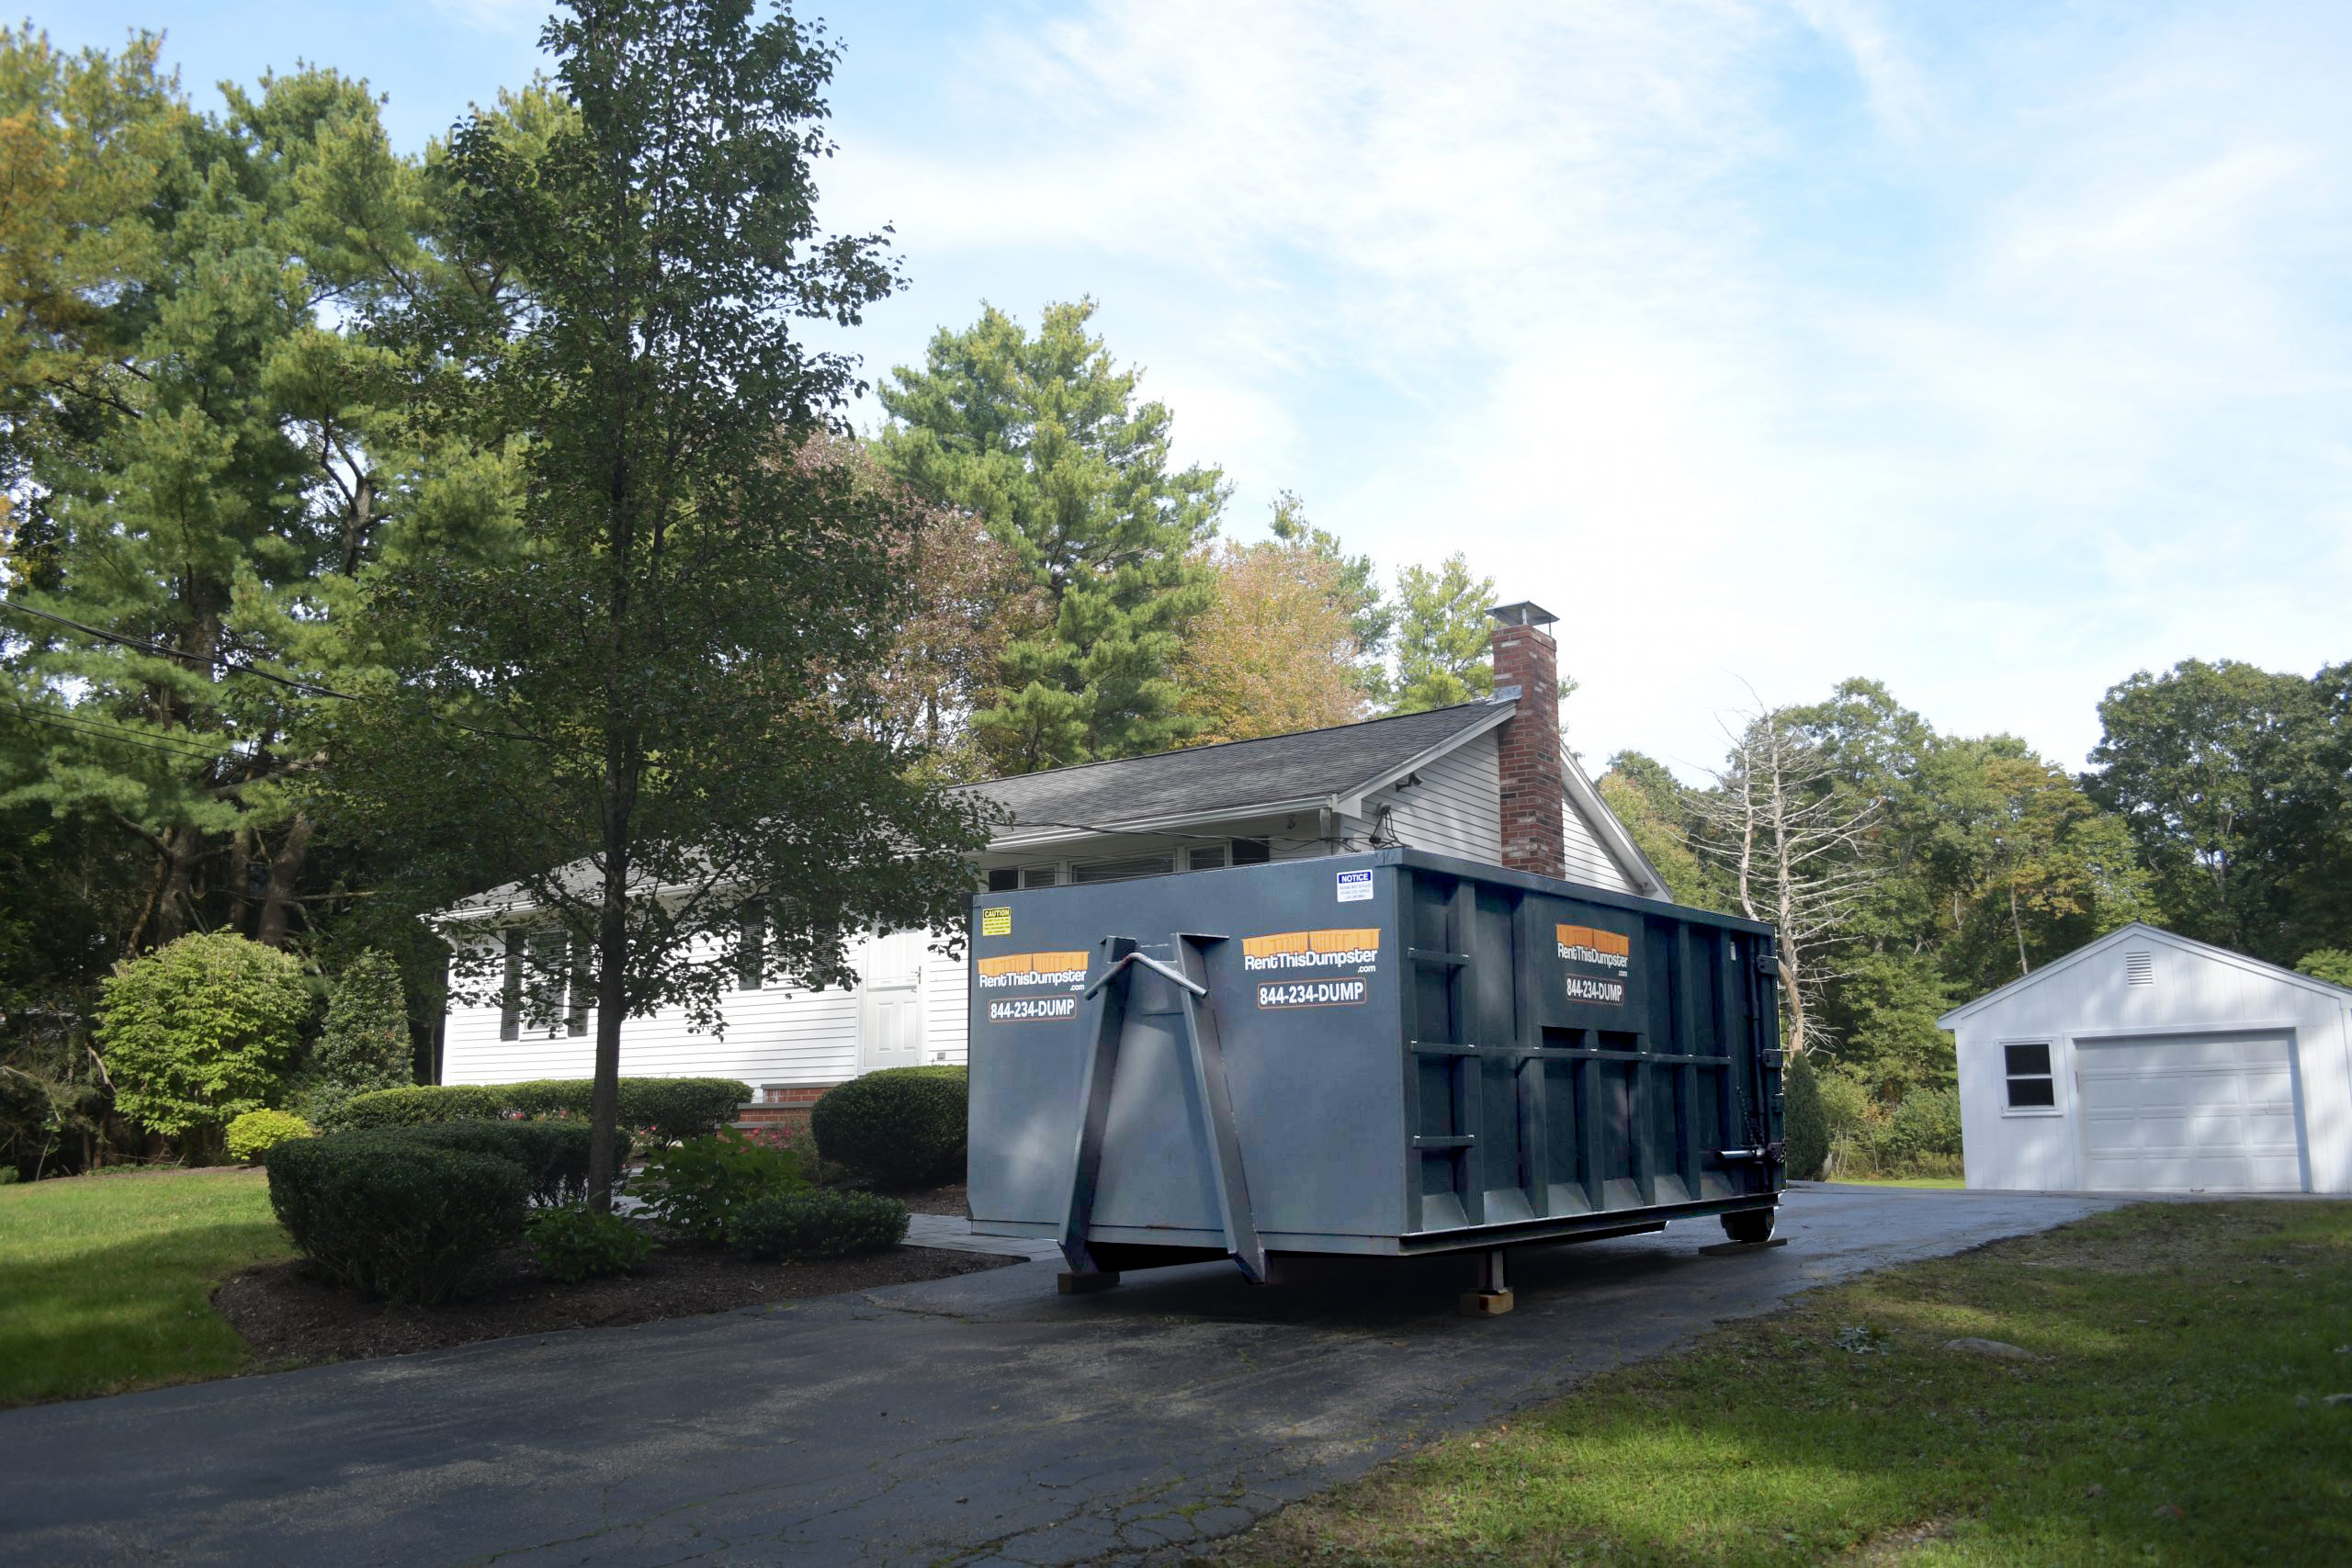 Sharon Dumpster Rental Company | Rent This Dumpster